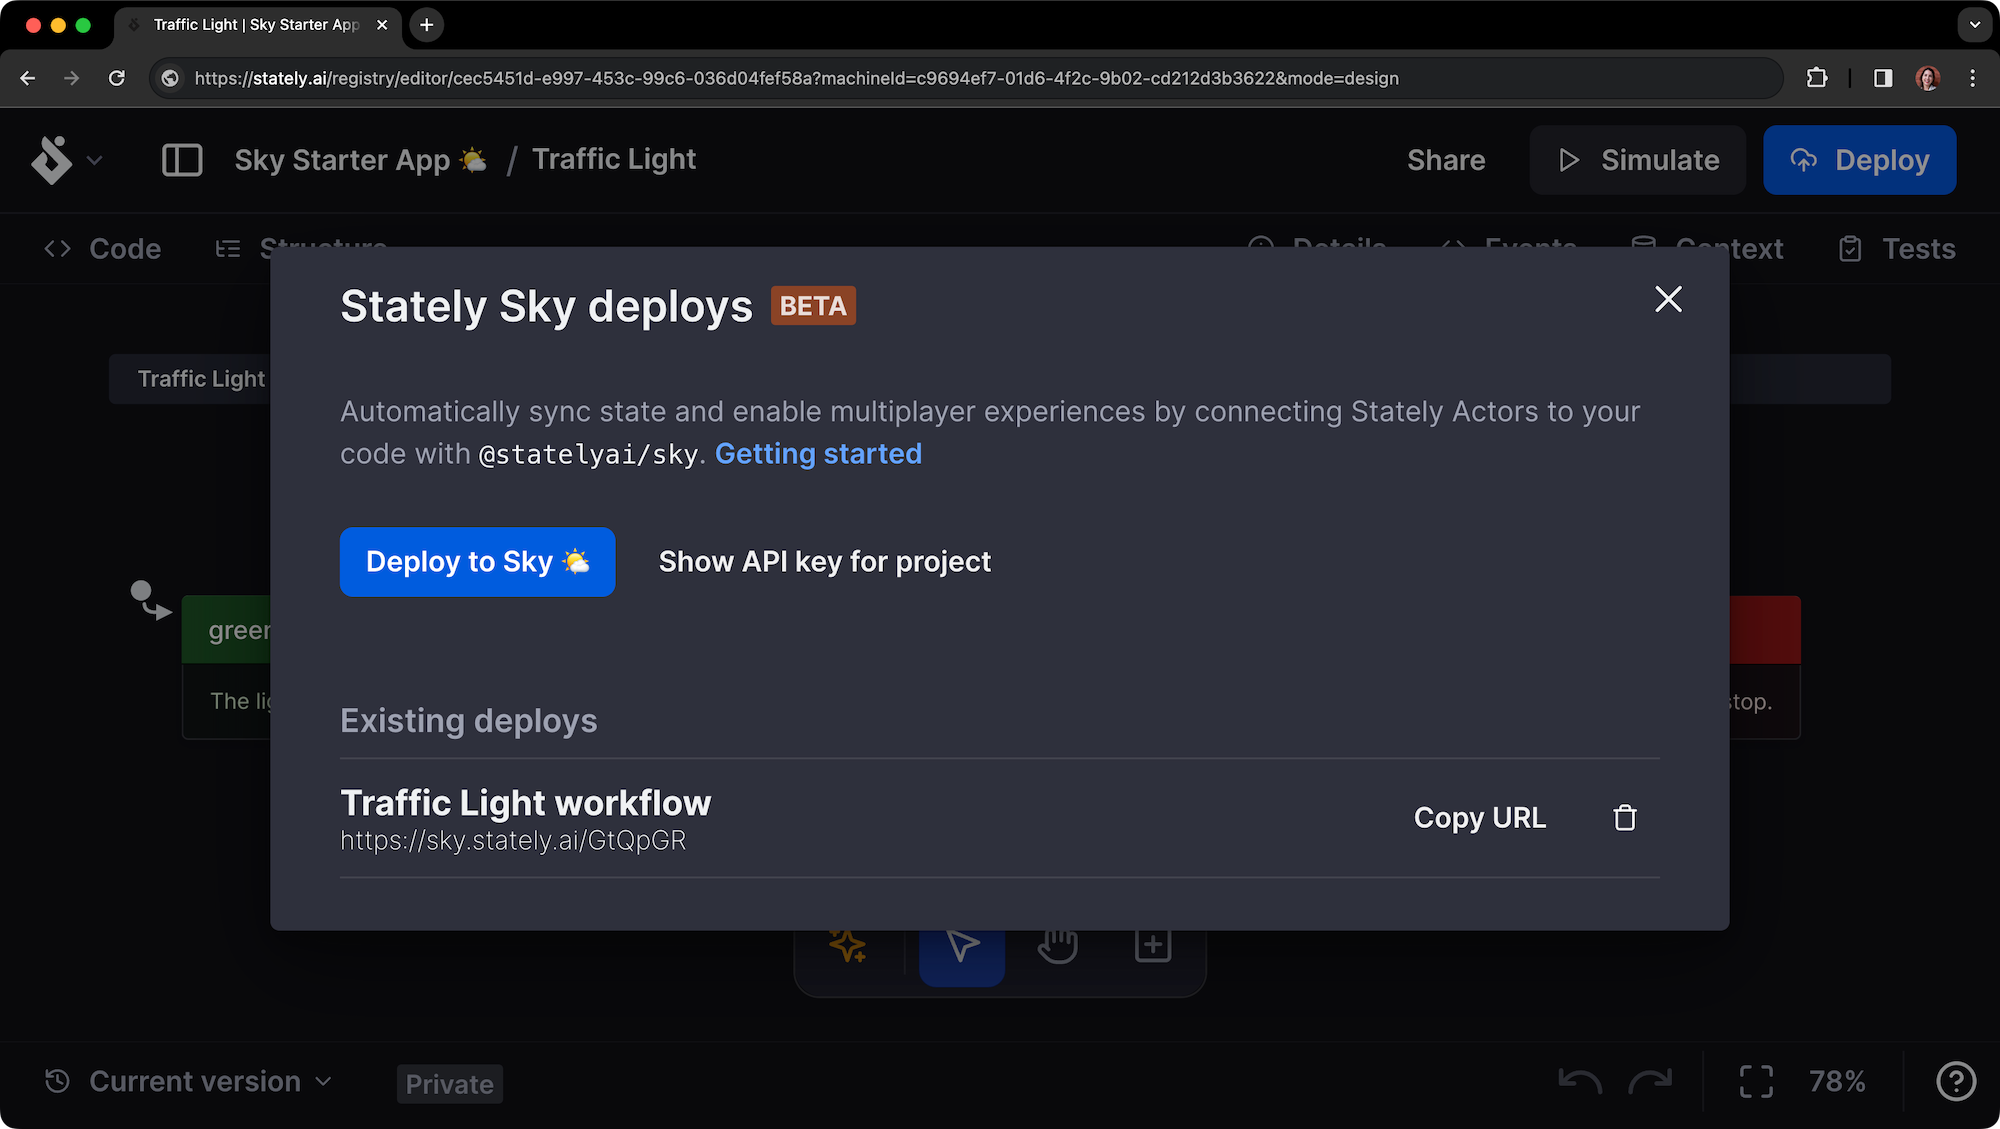 Stately Sky modal shows the Traffic light workflow listed under Existing deploys. The workflow has its own URL with the options to Copy URL or delete alongside.